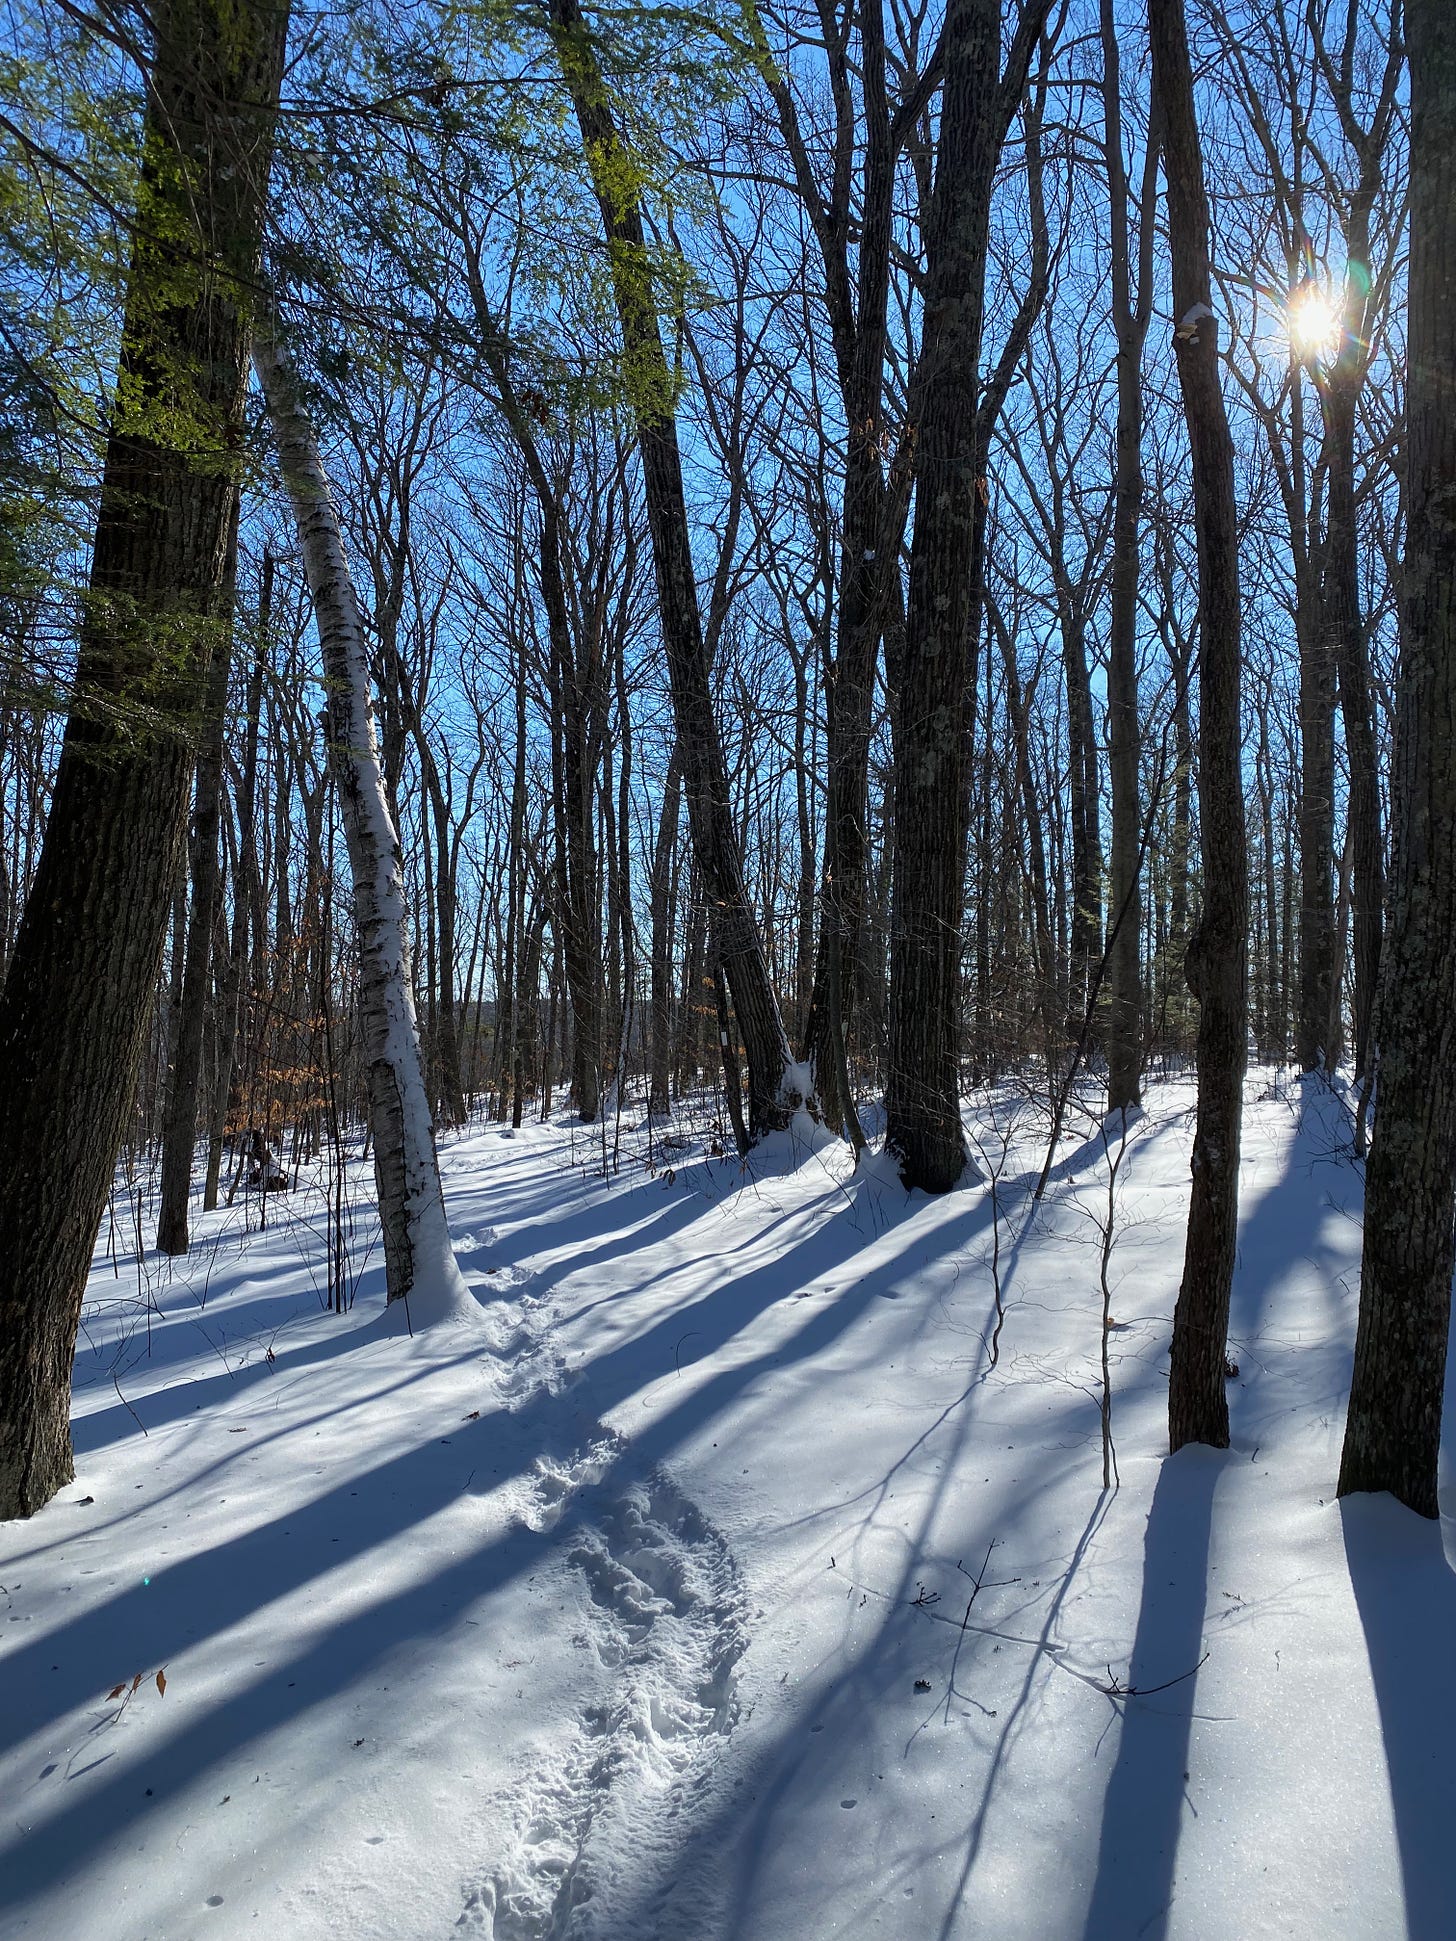 Snowy woods on a bright winter day. The sky is a deep blue, and the bare trees cast long blue shadows on the snow.